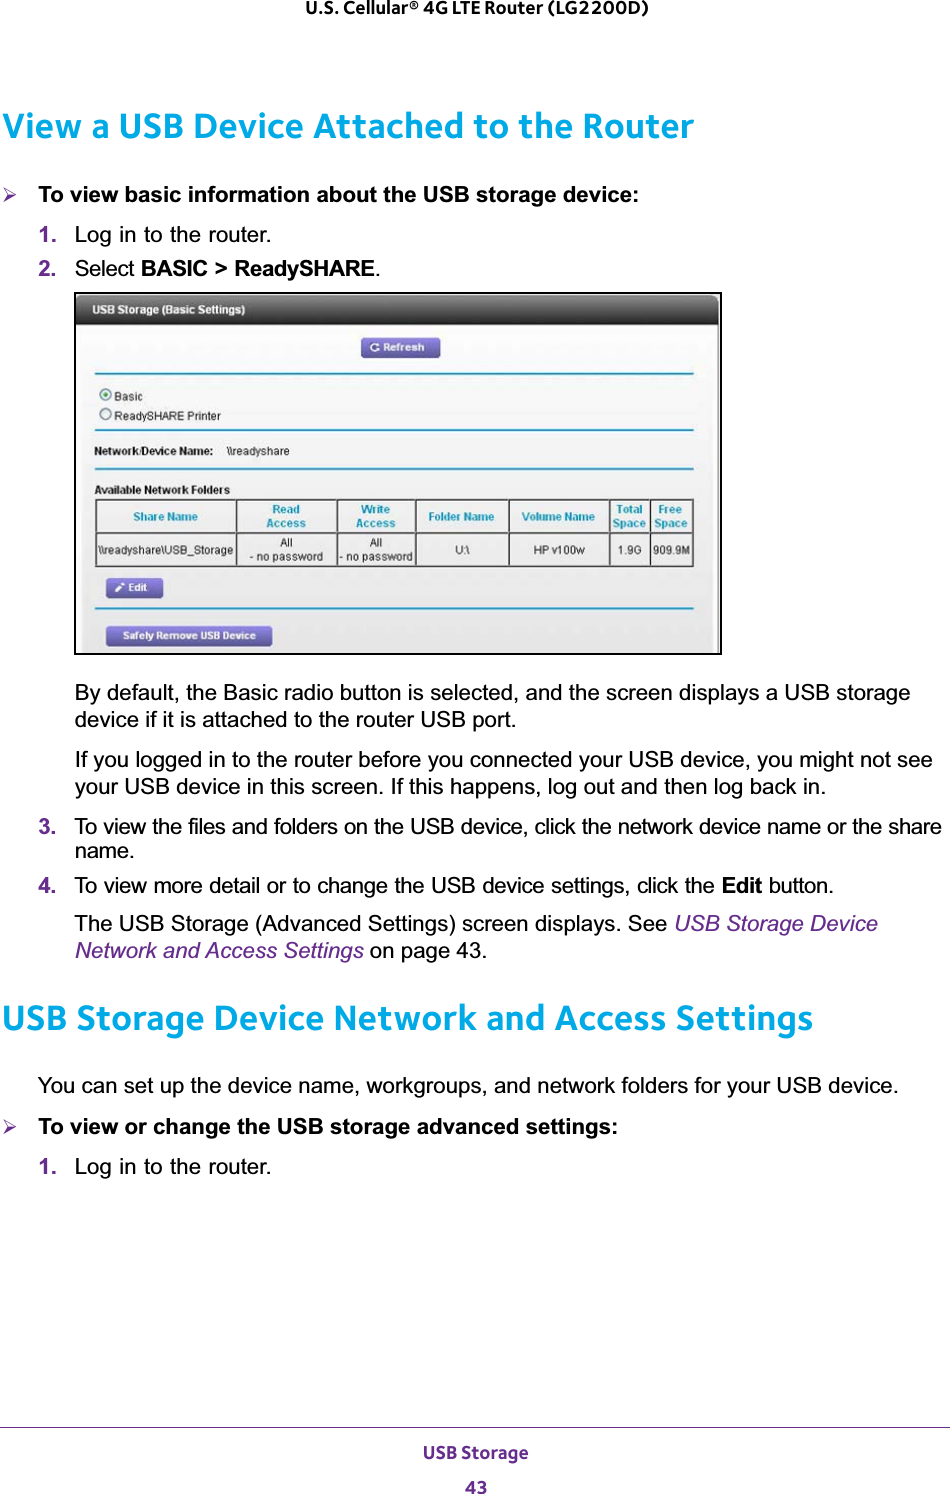 USB Storage43 U.S. Cellular® 4G LTE Router (LG2200D)View a USB Device Attached to the Router¾To view basic information about the USB storage device:1. Log in to the router.2. Select BASIC &gt; ReadySHARE.By default, the Basic radio button is selected, and the screen displays a USB storage device if it is attached to the router USB port.If you logged in to the router before you connected your USB device, you might not see your USB device in this screen. If this happens, log out and then log back in.3. To view the files and folders on the USB device, click the network device name or the share name.4. To view more detail or to change the USB device settings, click the Edit button. The USB Storage (Advanced Settings) screen displays. See USB Storage Device Network and Access Settings on page 43.USB Storage Device Network and Access SettingsYou can set up the device name, workgroups, and network folders for your USB device. ¾To view or change the USB storage advanced settings:1. Log in to the router.